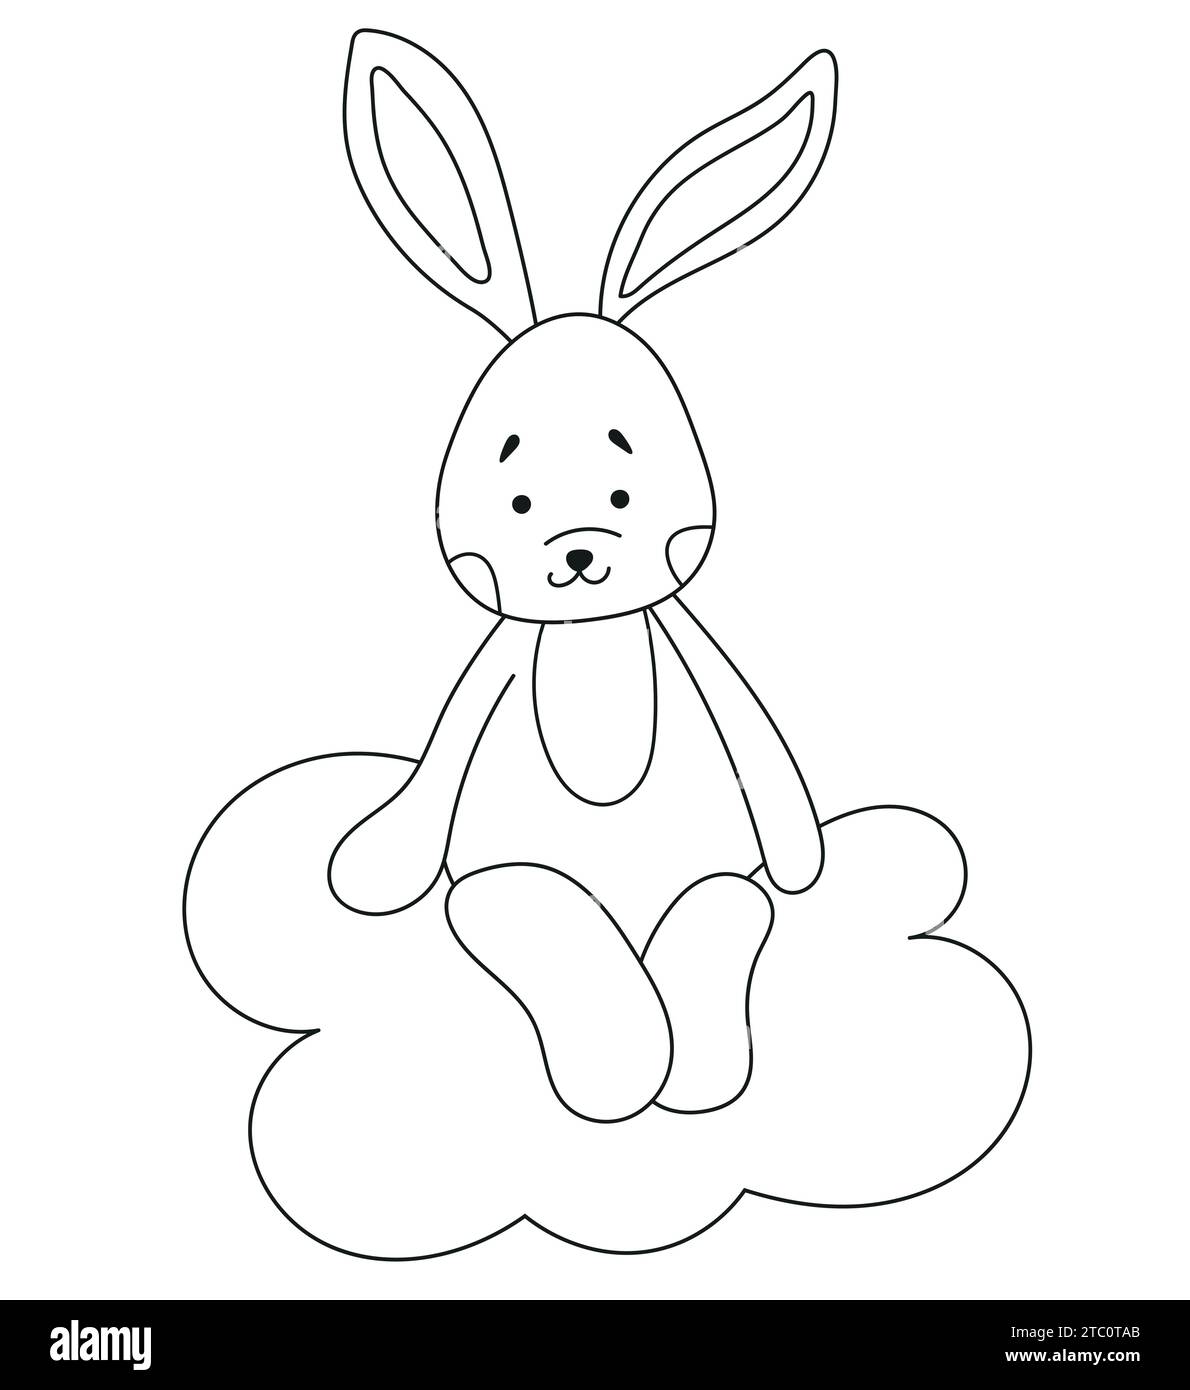 Coloring Page For Kids Featuring A Bunny Sitting On A Cloud, Perfect For Children'S Creativity Is A Delightful Coloring Book Featuring Vector Illustrations For Children'S Creativity Stock Vector